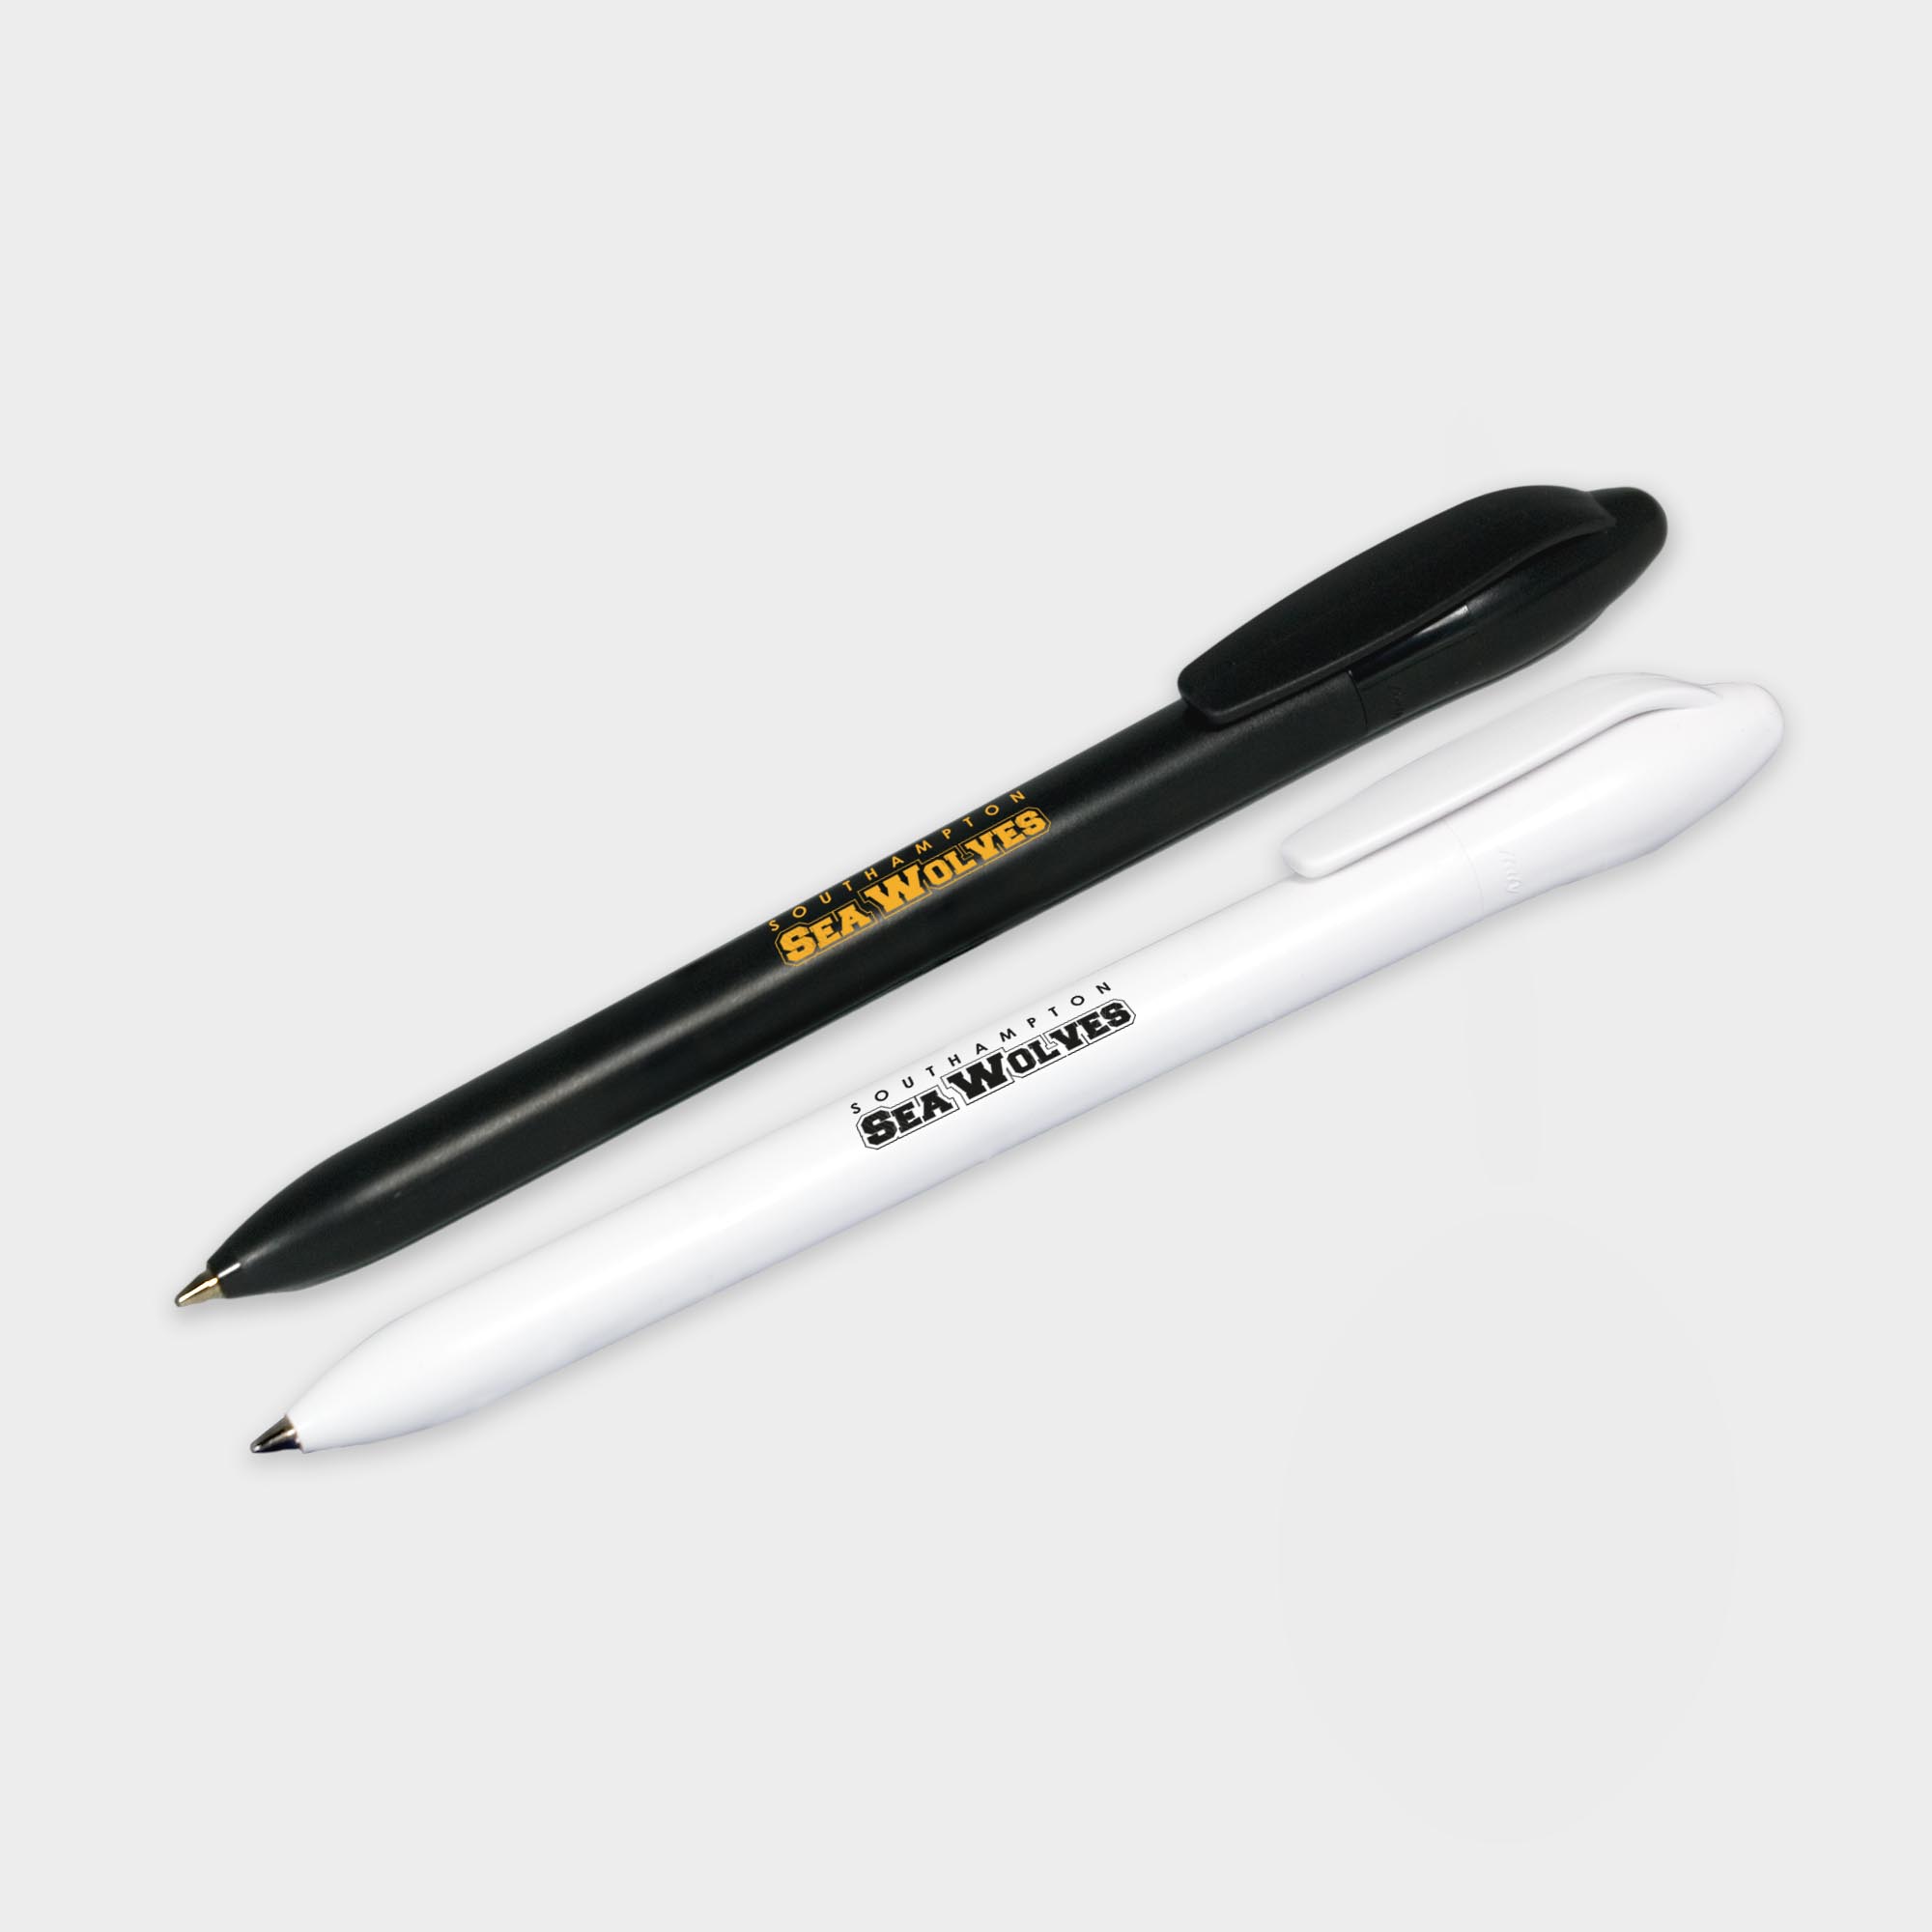 The Green & Good Yukon Pen made from recycled plastic. Twist action budget pen available in black or white. Black ink as standard.